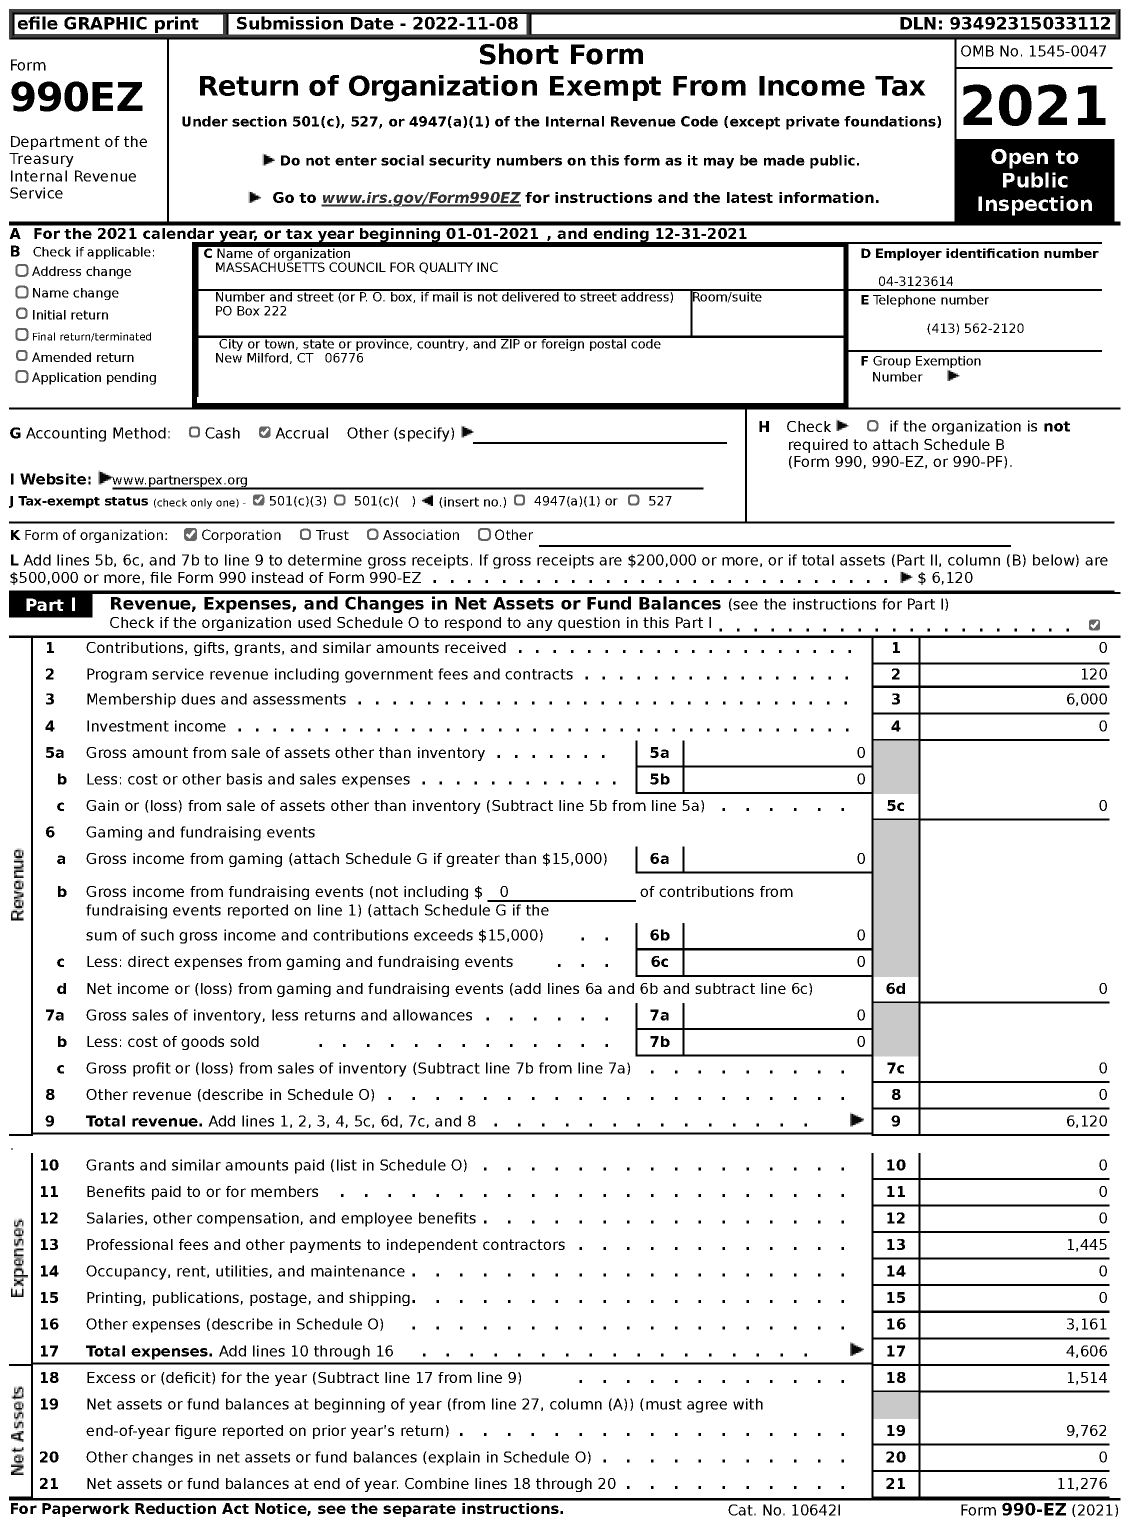 Image of first page of 2021 Form 990EZ for Massachusetts Council for Quality